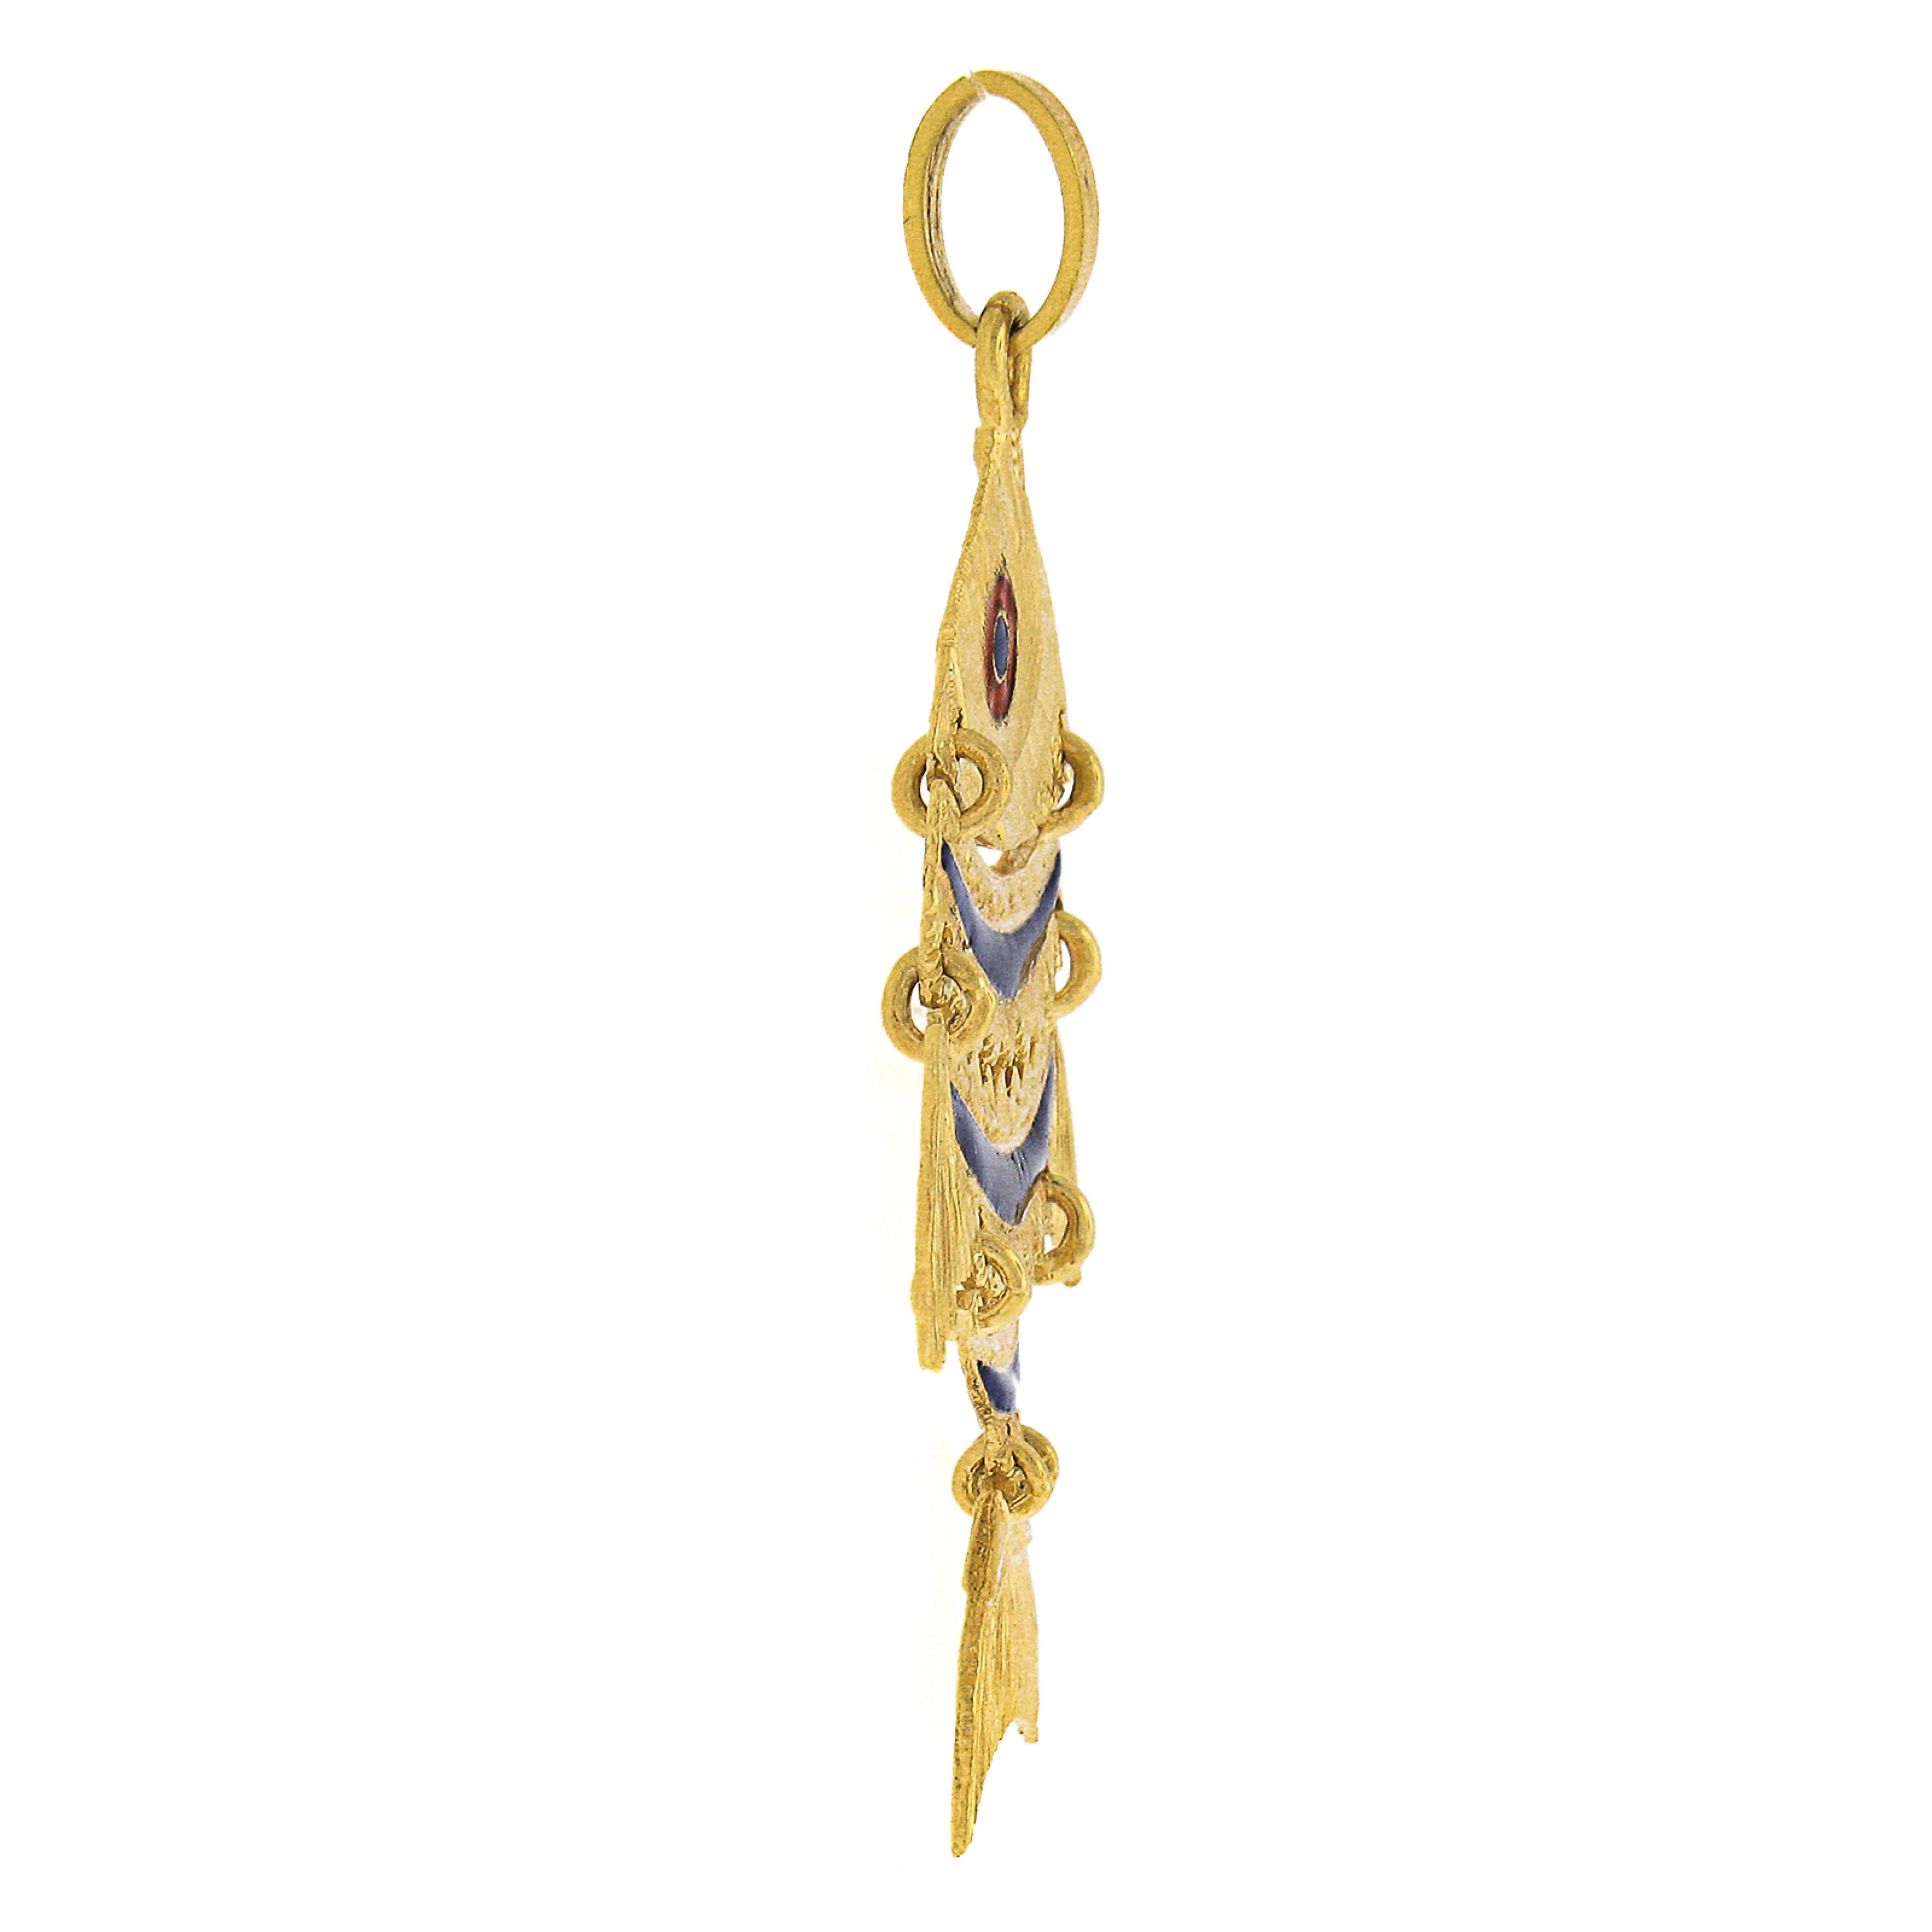 Material: 18K Solid Yellow Gold
Weight: 9.13 Grams
Height: 50.3mm (1.9